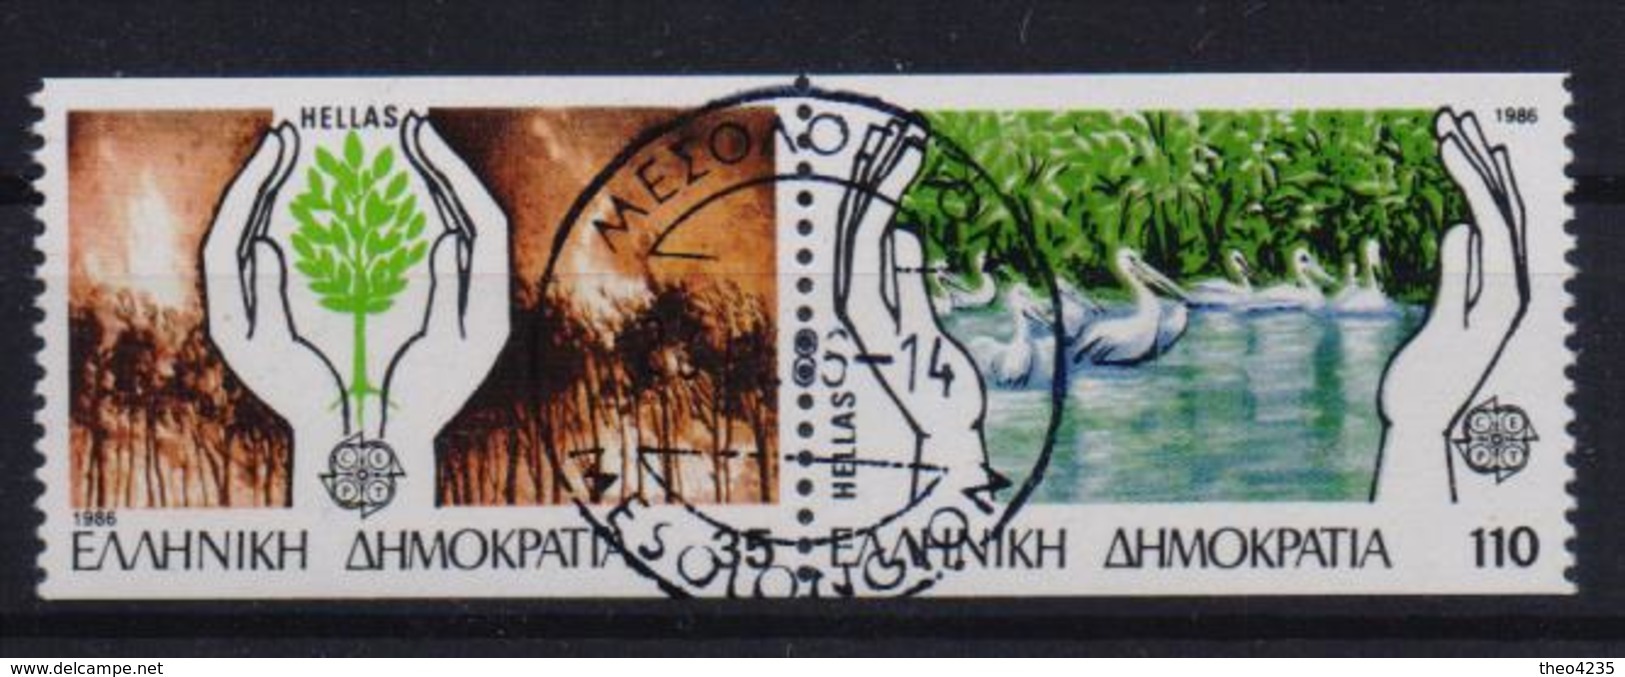 GREECE STAMPS EUROPA 1986(HORIZONTALLY IMPERFORATE)SE-TENANT/FIRST DAY ISSUE CANCELLED-23/4/86-USED-COMPLETE SET - Oblitérés